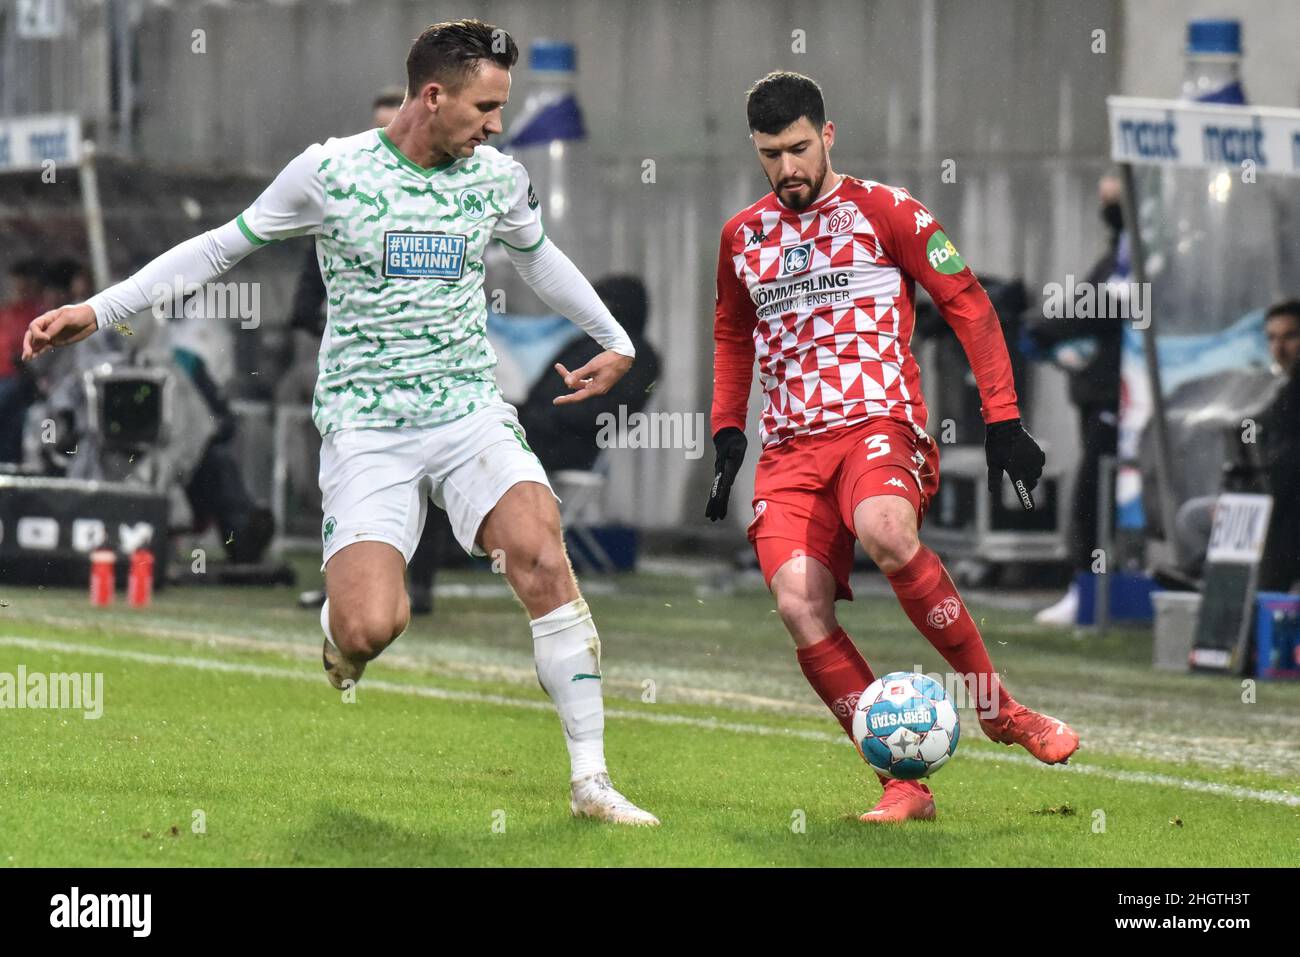 Germany ,Fuerth, Sportpark Ronhof Thomas Sommer - 22 Jan 2022 - Fussball, 1.Bundesliga - SpVgg Greuther Fuerth vs. FSV Mainz 05  Image: (fLTR) Paul Seguin (SpVgg Greuther Fürth,33), Aaron Martin (Mainz, 3)  DFL regulations prohibit any use of photographs as image sequences and or quasi-video Stock Photo